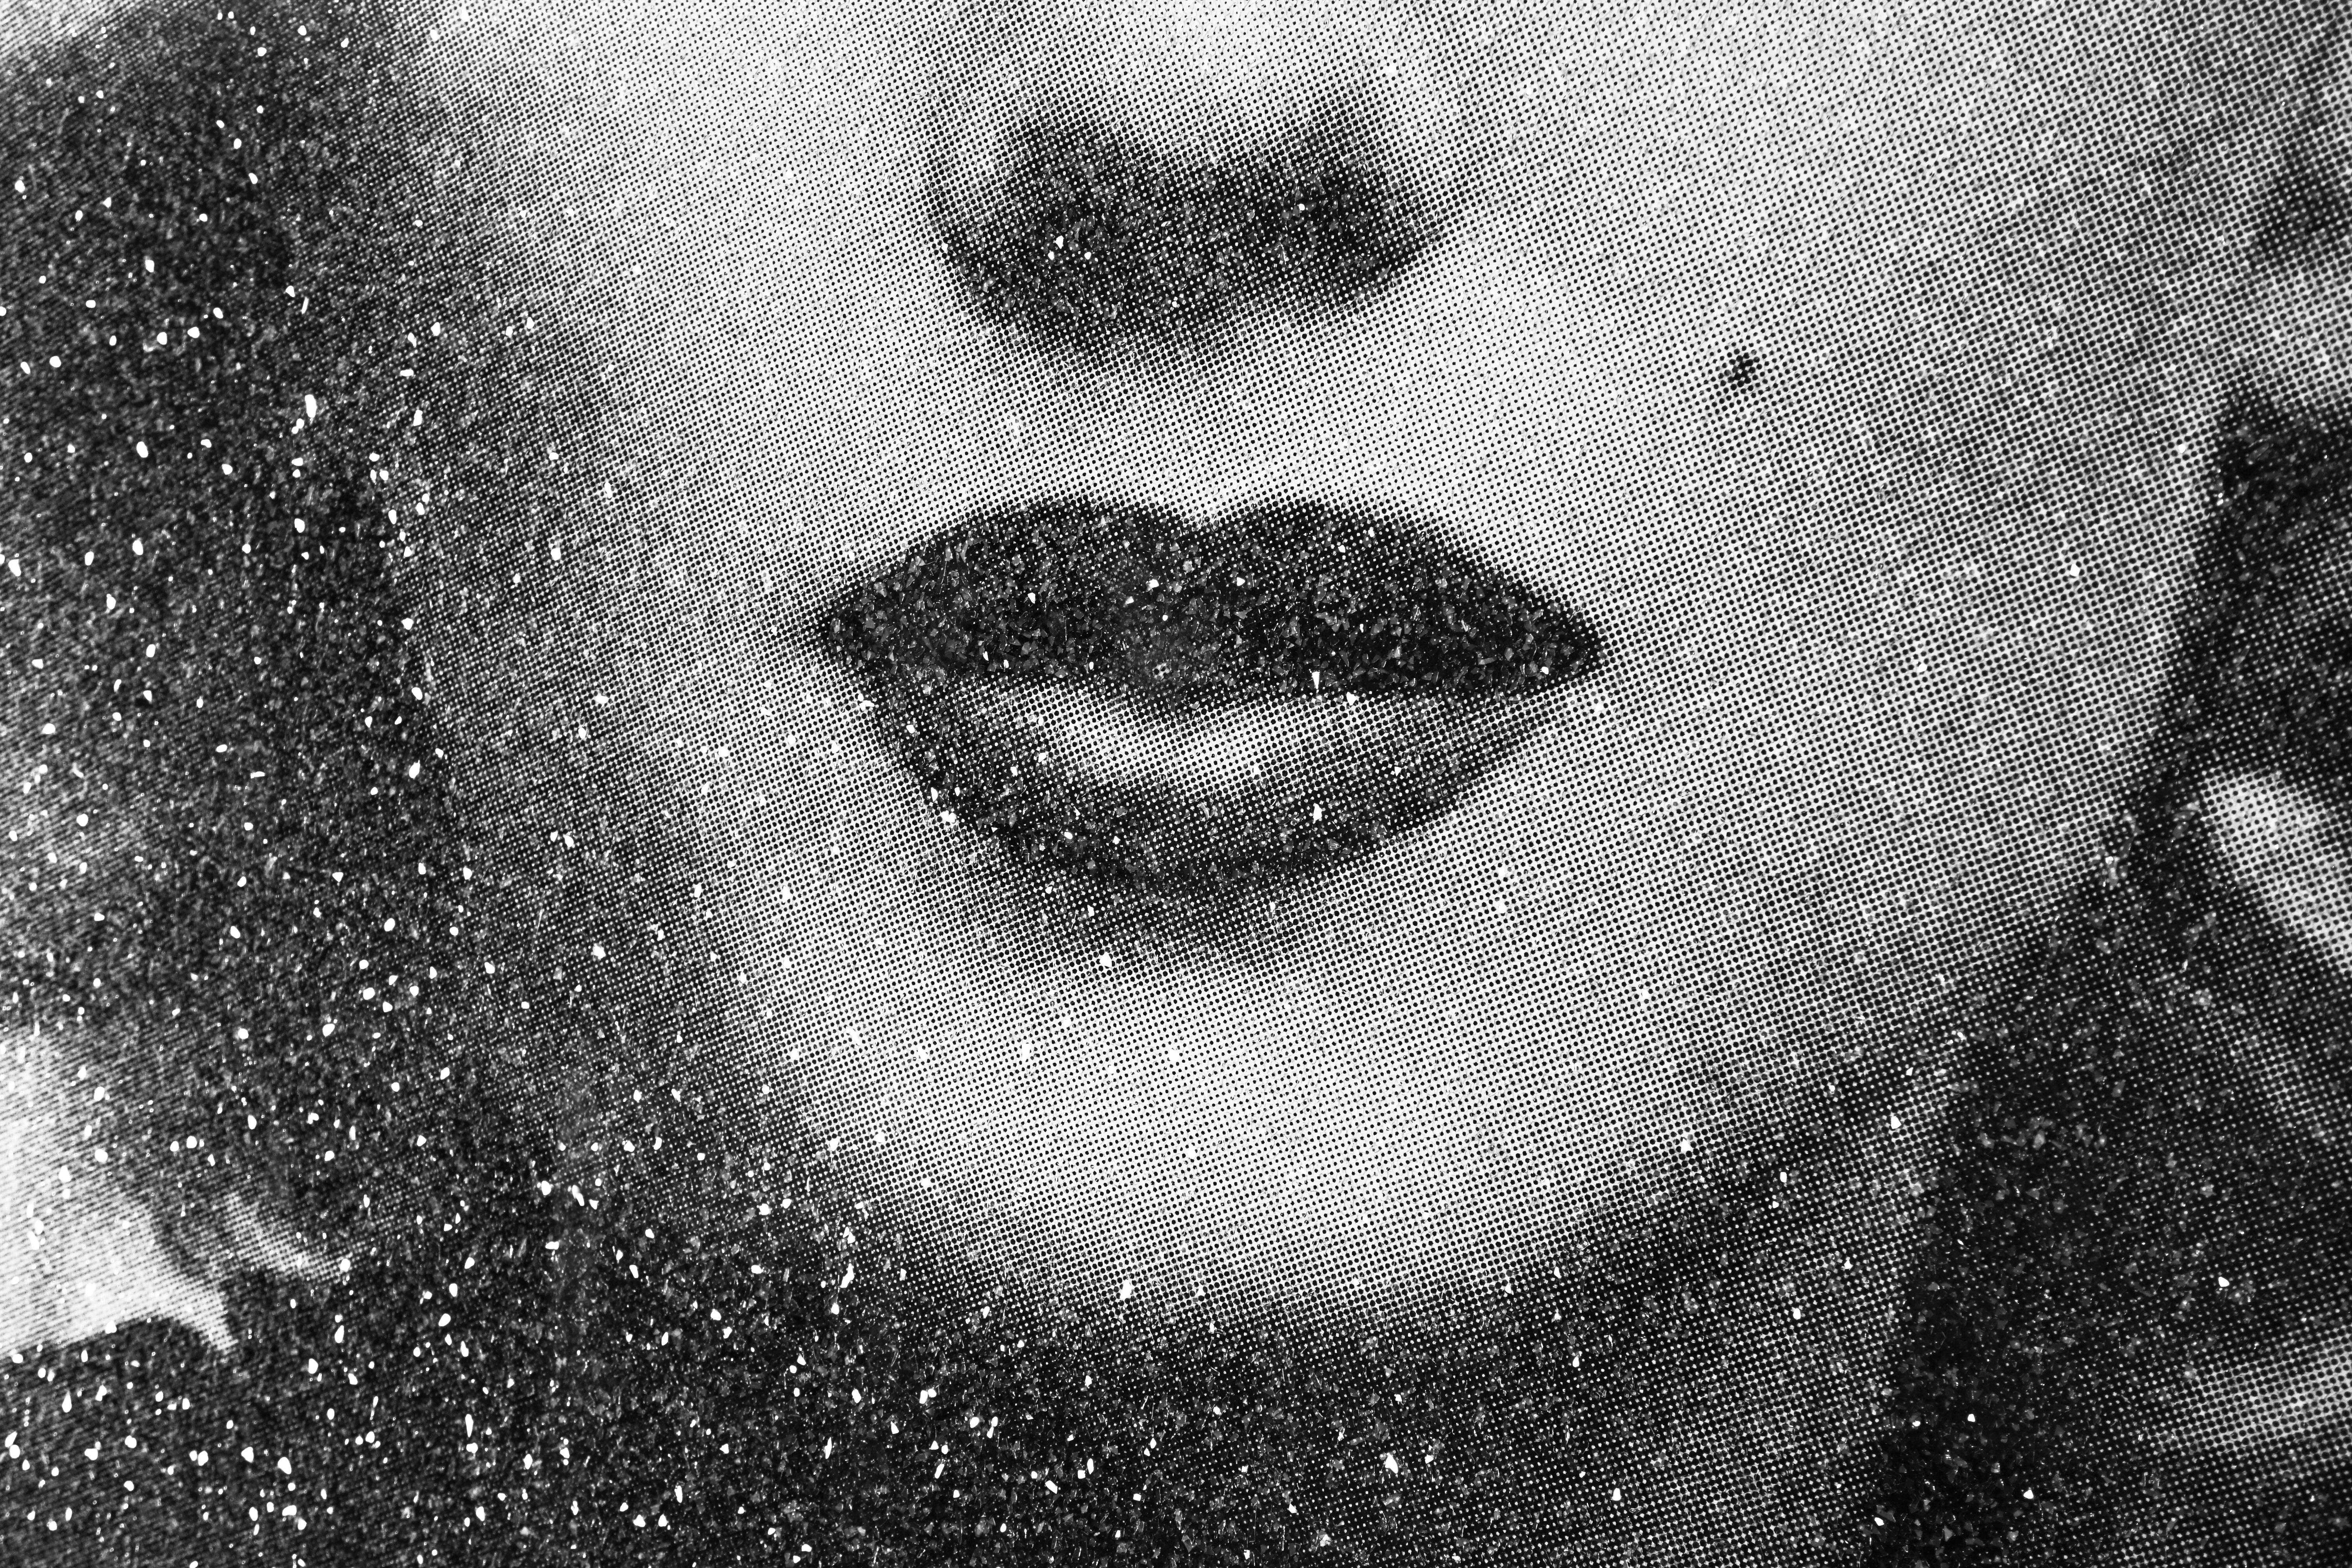 Russell Young, Marilyn with Diamond Dust in Black & White,  2019 4